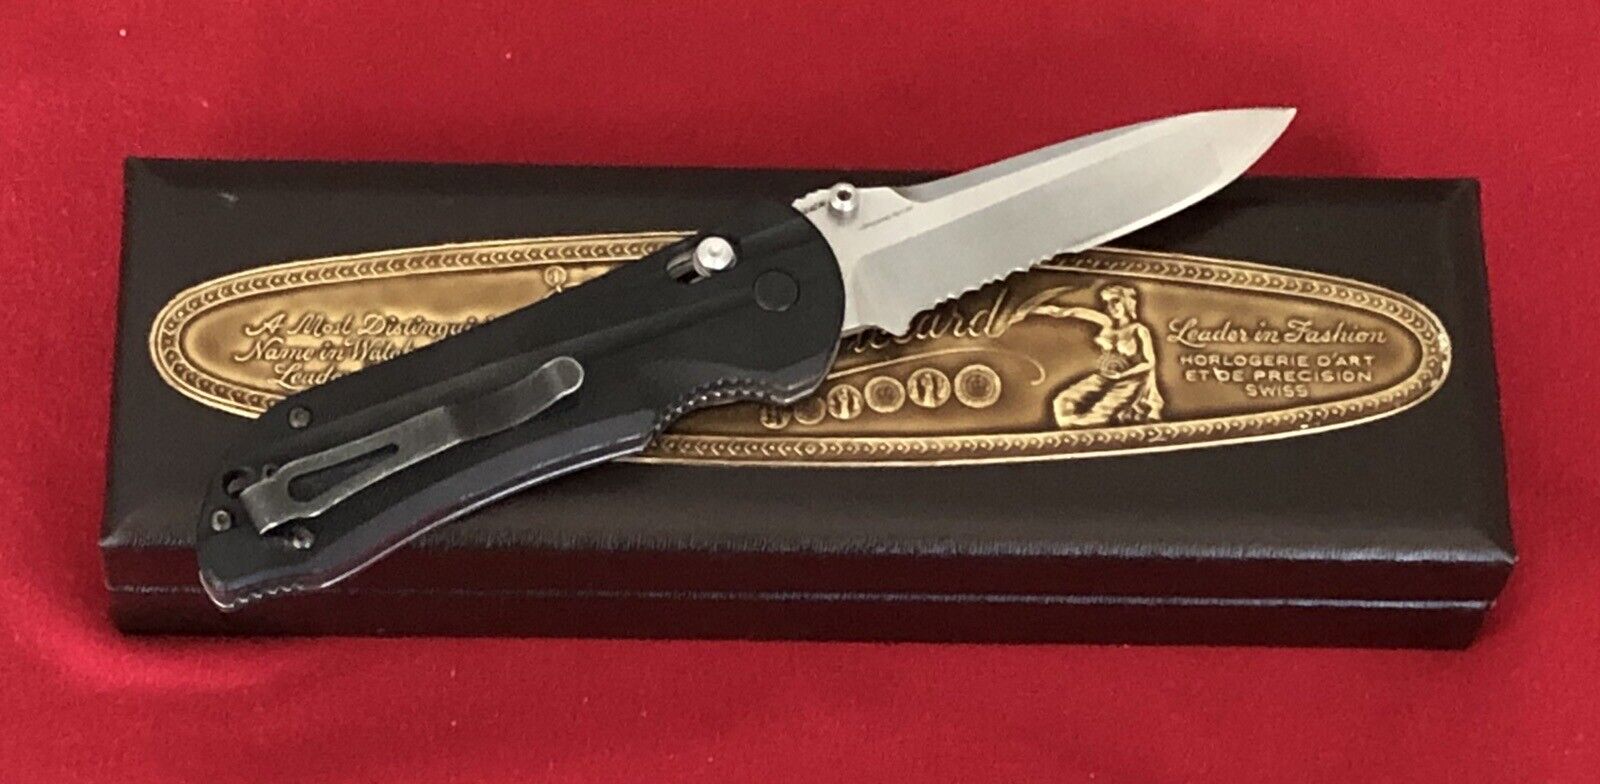 BENCHMADE PRODUCTION NO. 909 PAT. RE41,259 - 154CM STEEL - LUCIEN PICCARD BOX